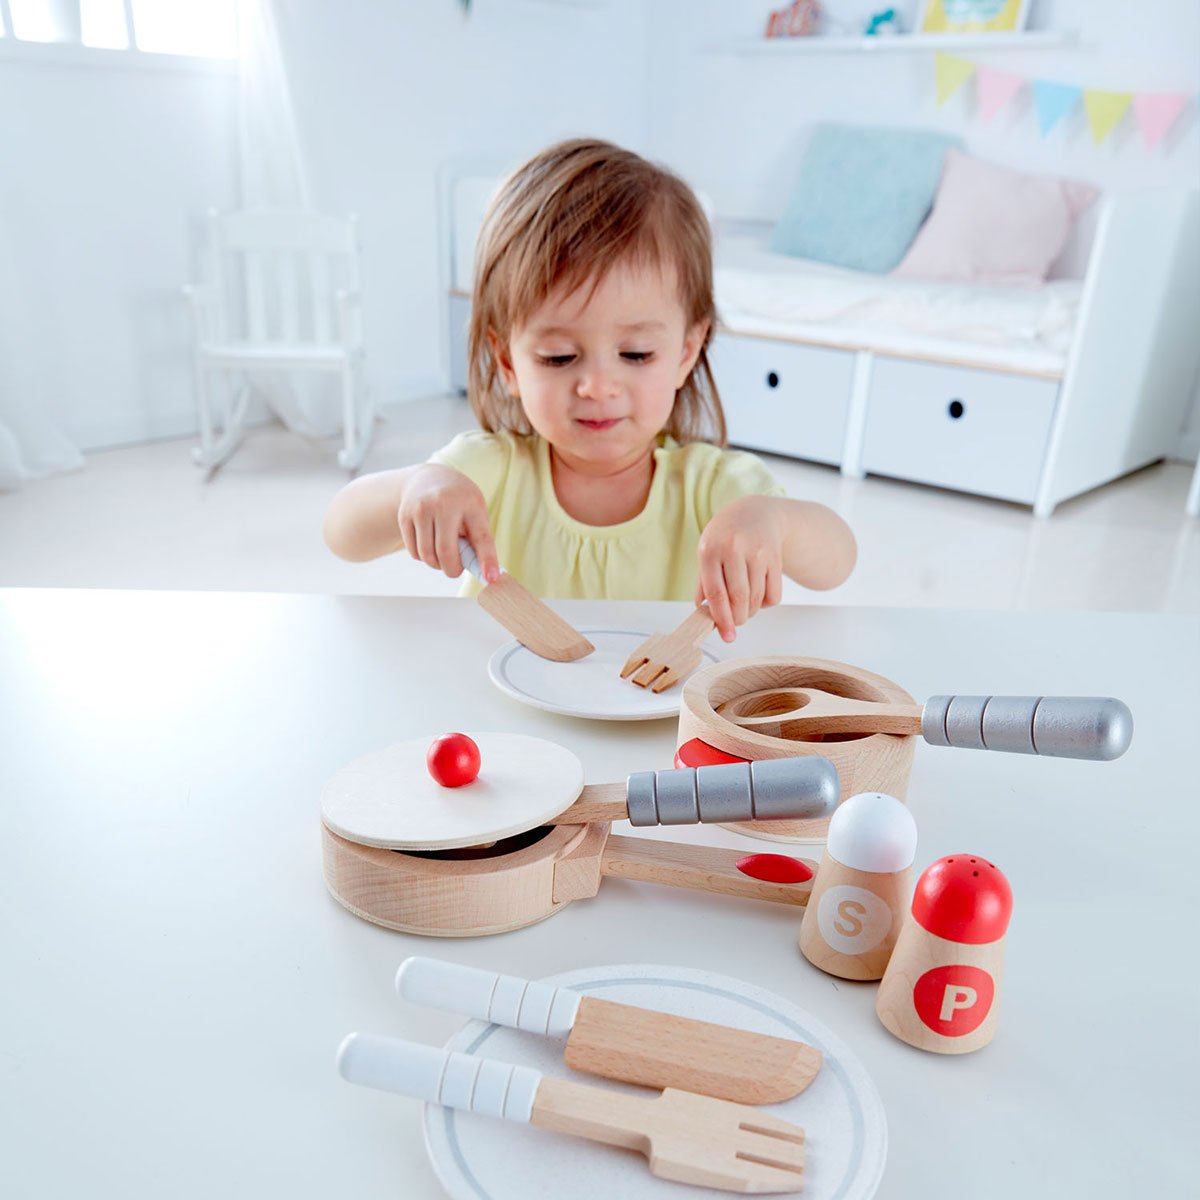 https://cdn.shopify.com/s/files/1/0369/6807/1308/products/hape-cook-and-seve-set_2_1800x1800.jpg?v=1586915728